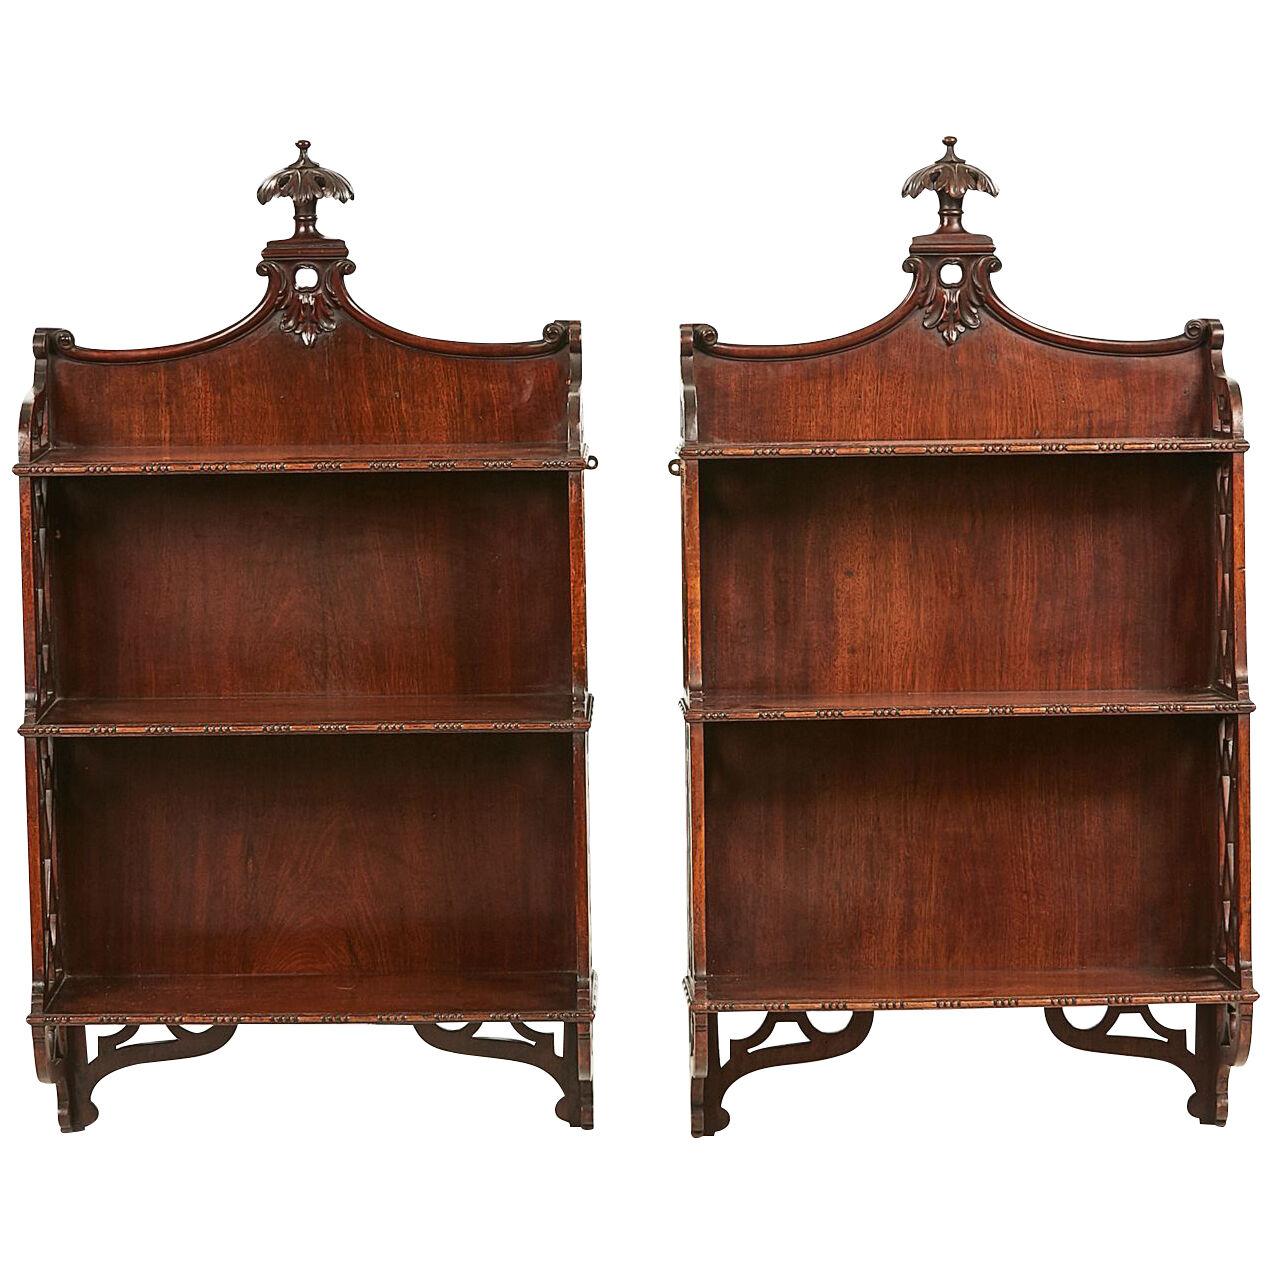 Early 19th Century William IV Pair of Hanging Wall Shelves